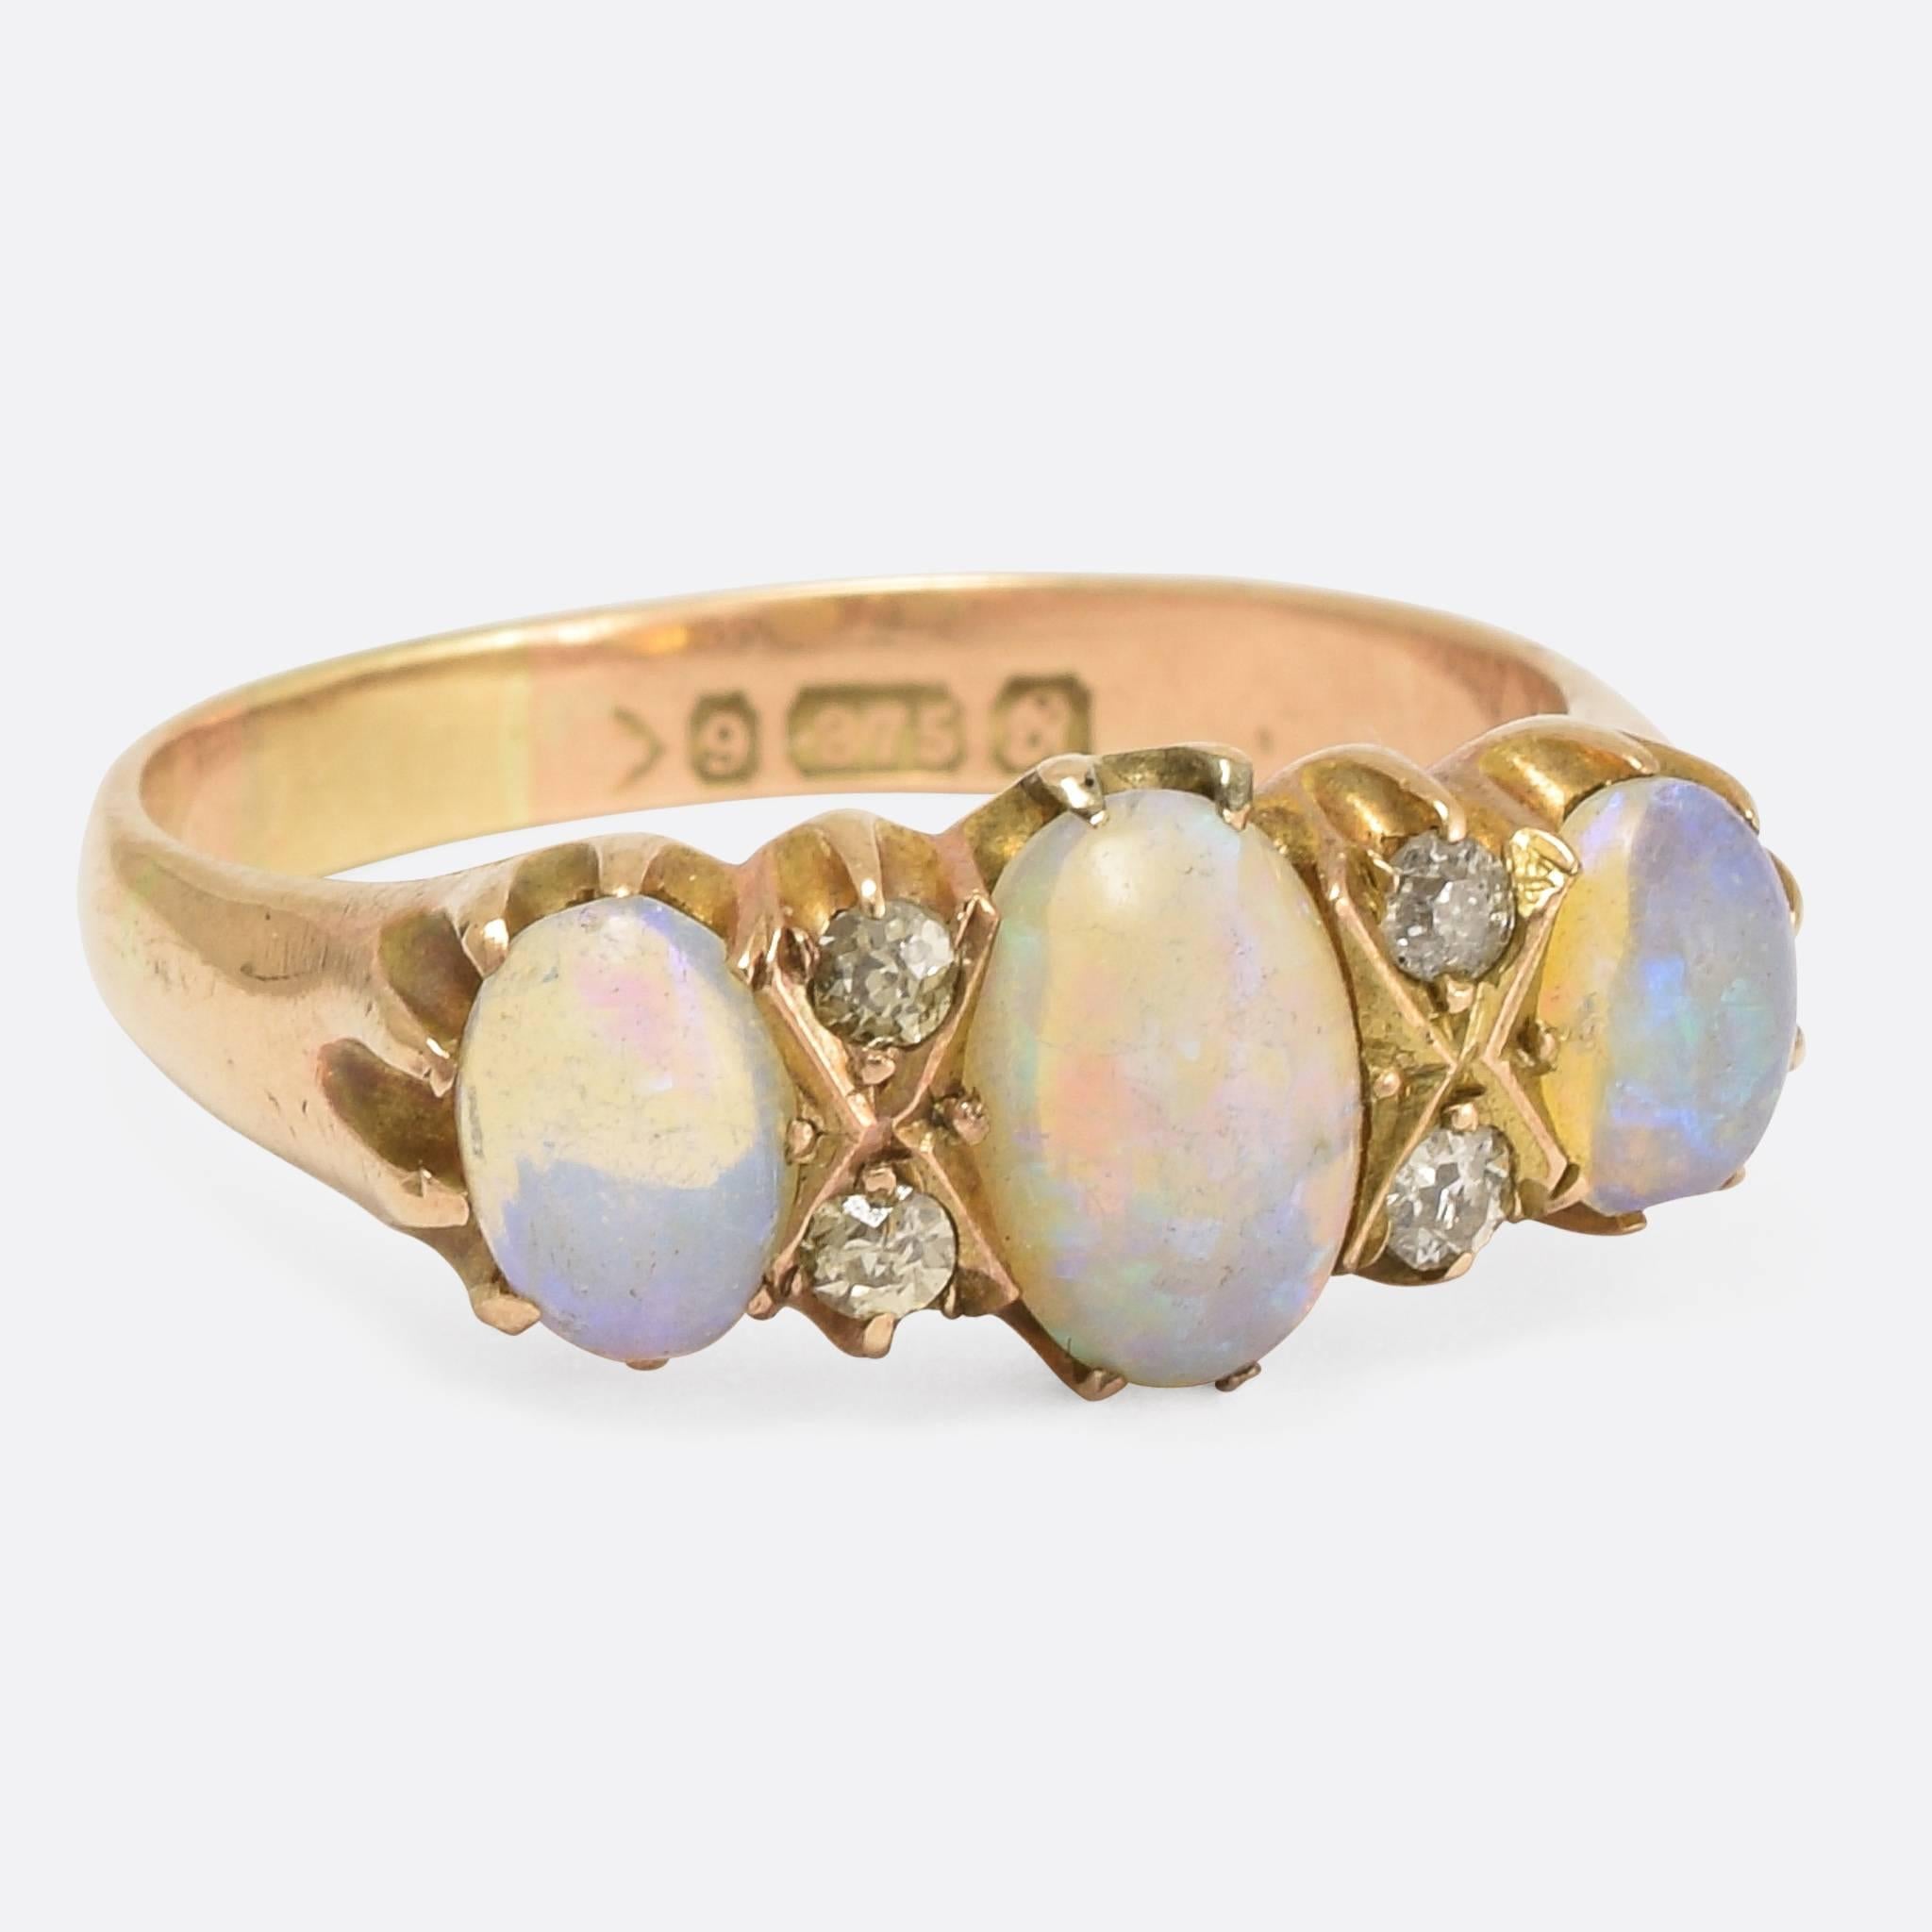 A sweet Edwardian period Opal and Diamond gypsy ring, with claw settings, the richly coloured opals displaying blues, greens & yellows are interspersed by the sparkling white old mine cuts. Modelled in 9k gold, the ring bears clear Chester hallmarks